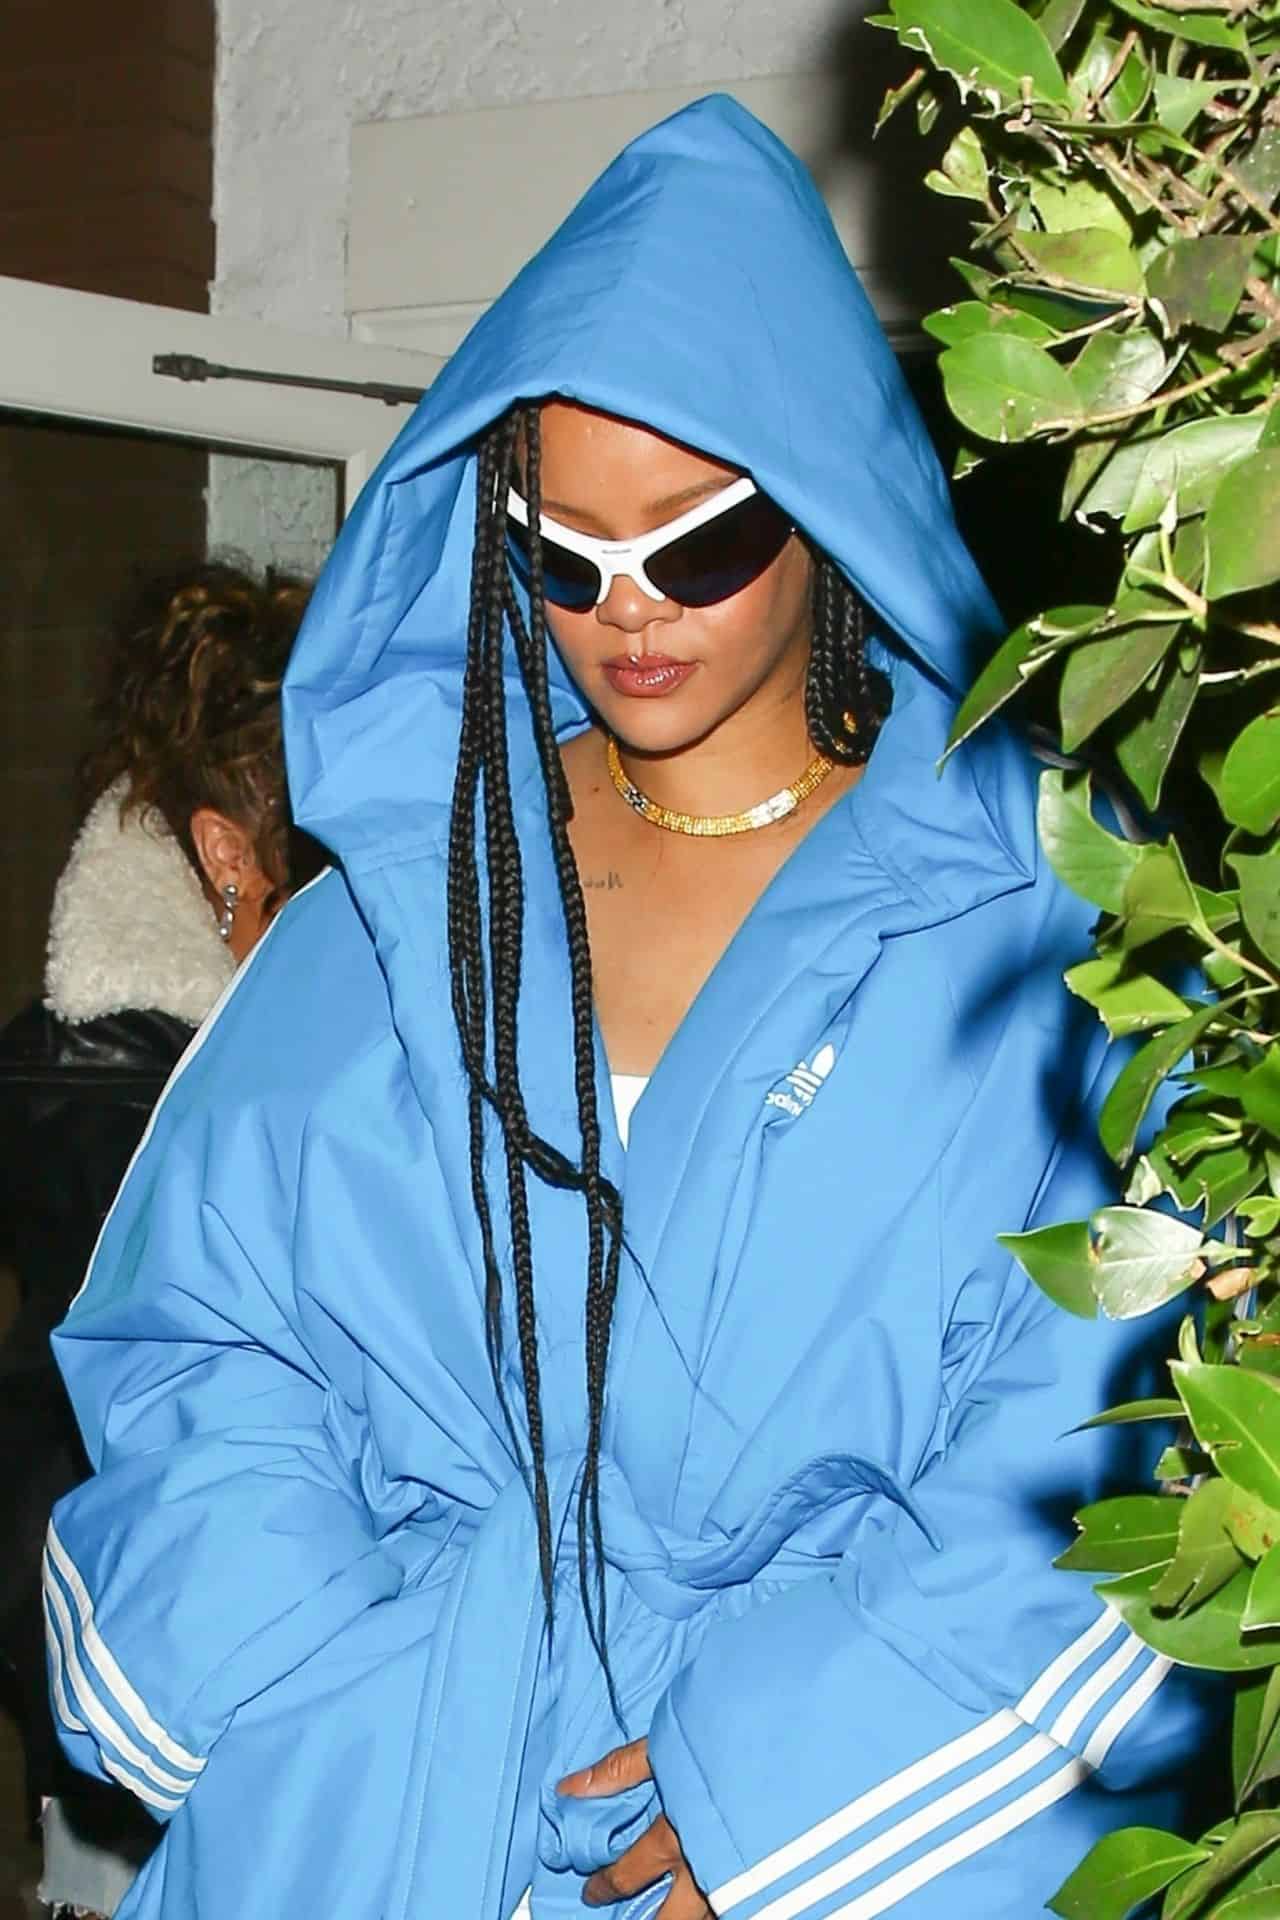 Rihanna Amazes in a Vivid Blue Coat and Thigh-high Boots in Santa Monica